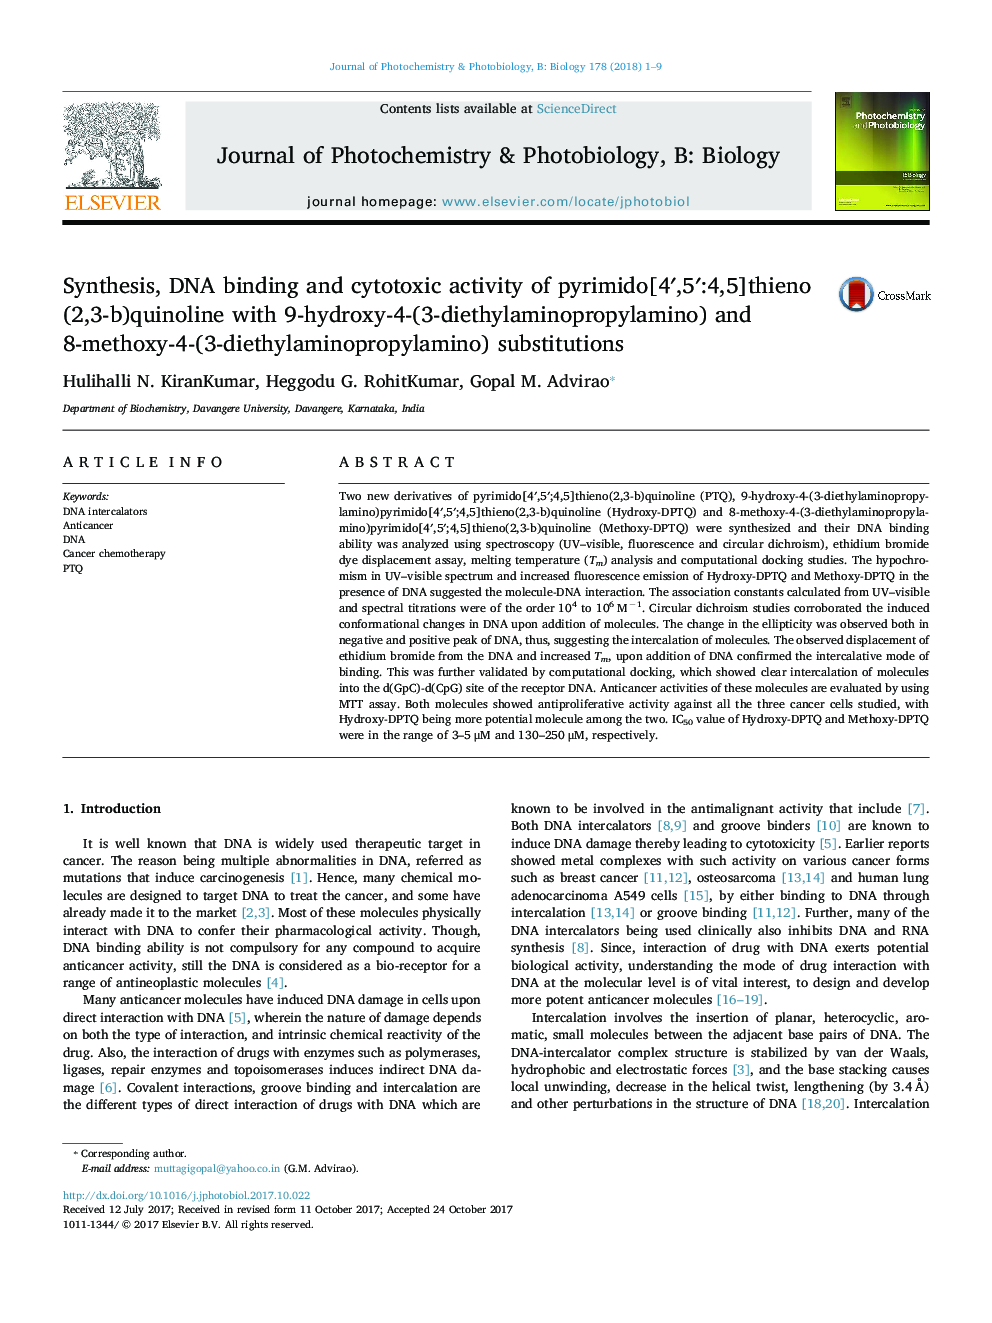 Synthesis, DNA binding and cytotoxic activity of pyrimido[4â²,5â²:4,5]thieno(2,3-b)quinoline with 9-hydroxy-4-(3-diethylaminopropylamino) and 8-methoxy-4-(3-diethylaminopropylamino) substitutions